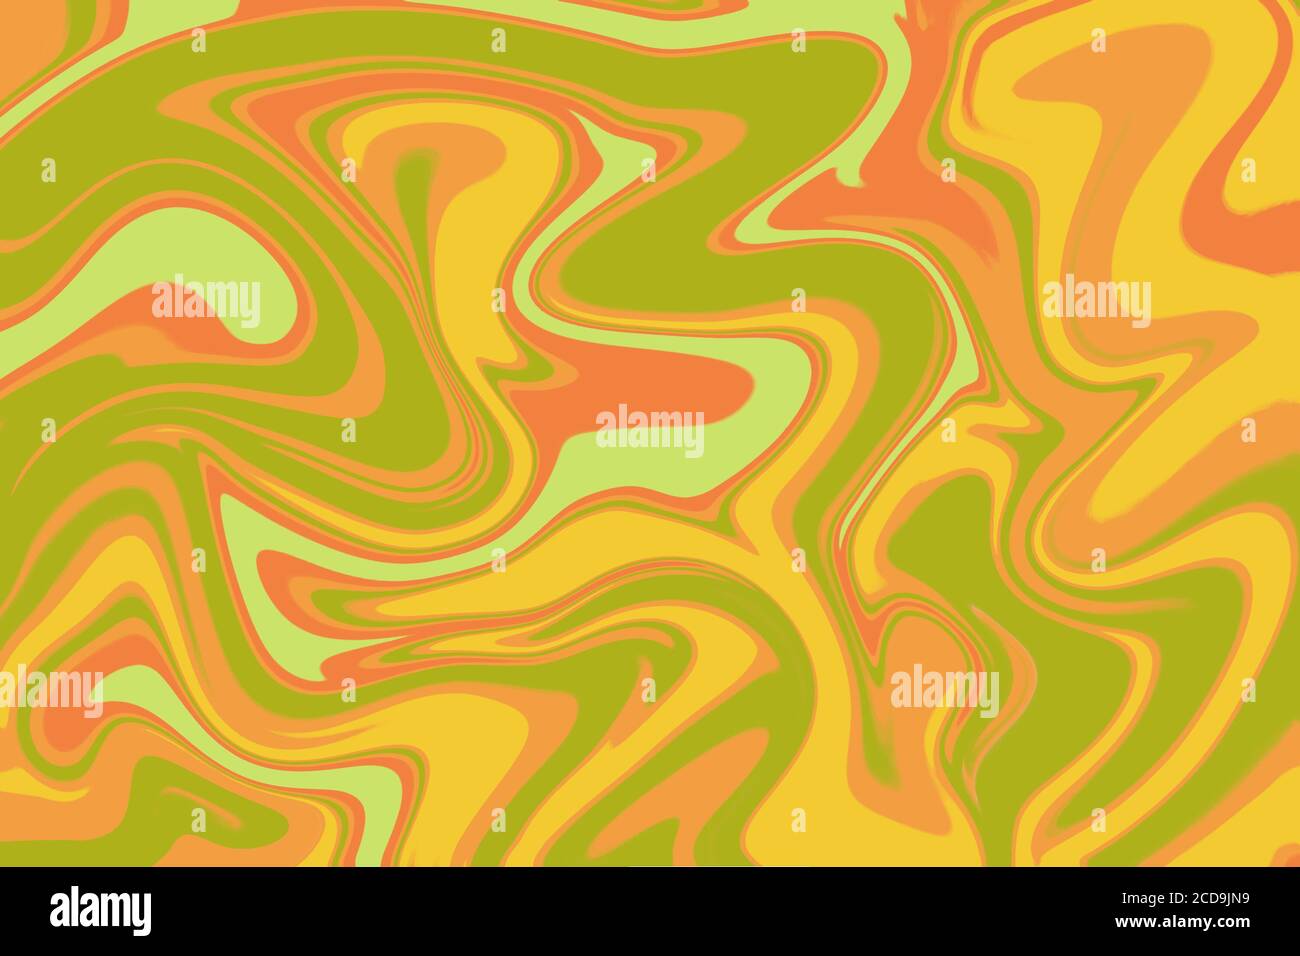 Orange green liquid paint abstraction. Liquify texture for autumn seasonal graphic design. Olive green and yellow digital illustration. Abstract float Stock Photo